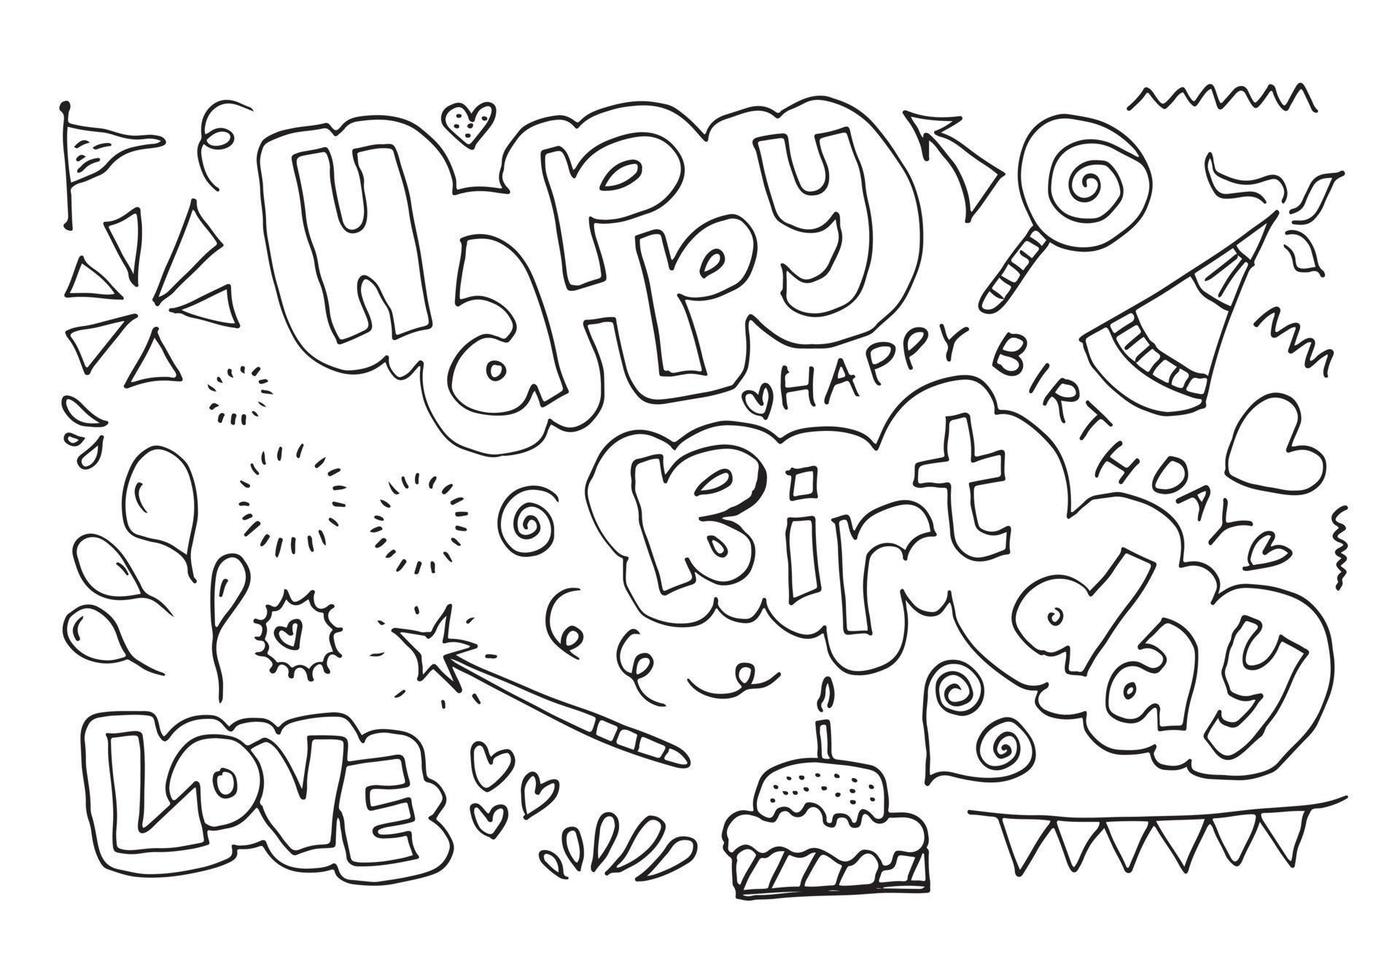 set of hand drawn doodle cartoon objects and symbols on the birthday party. vector